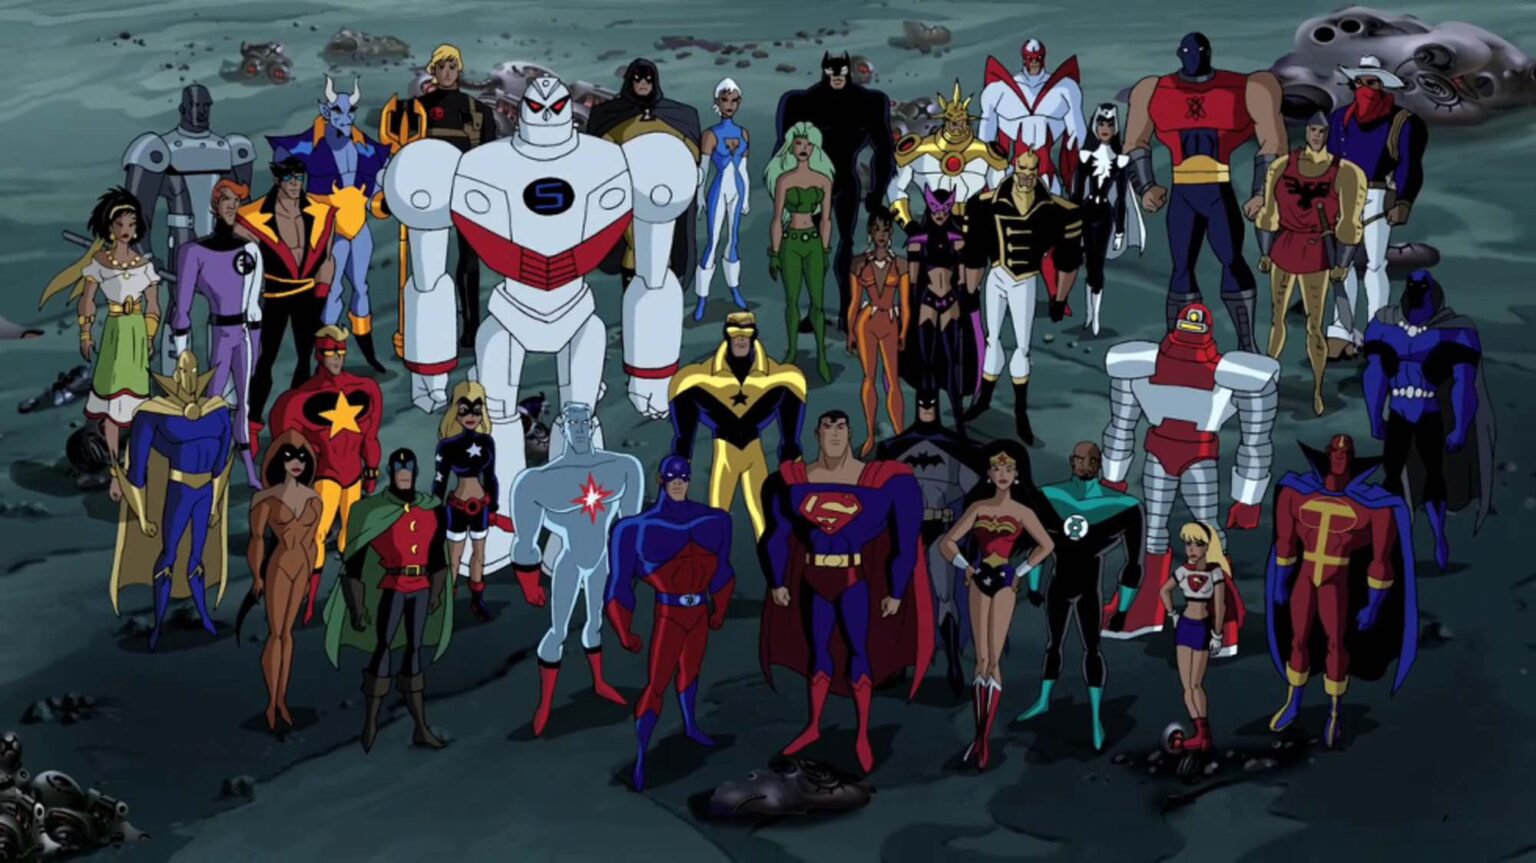 Wish the DCEU was better? Dive into the world of animation with some of the best DC animated movies of all time to get that superhero fix.